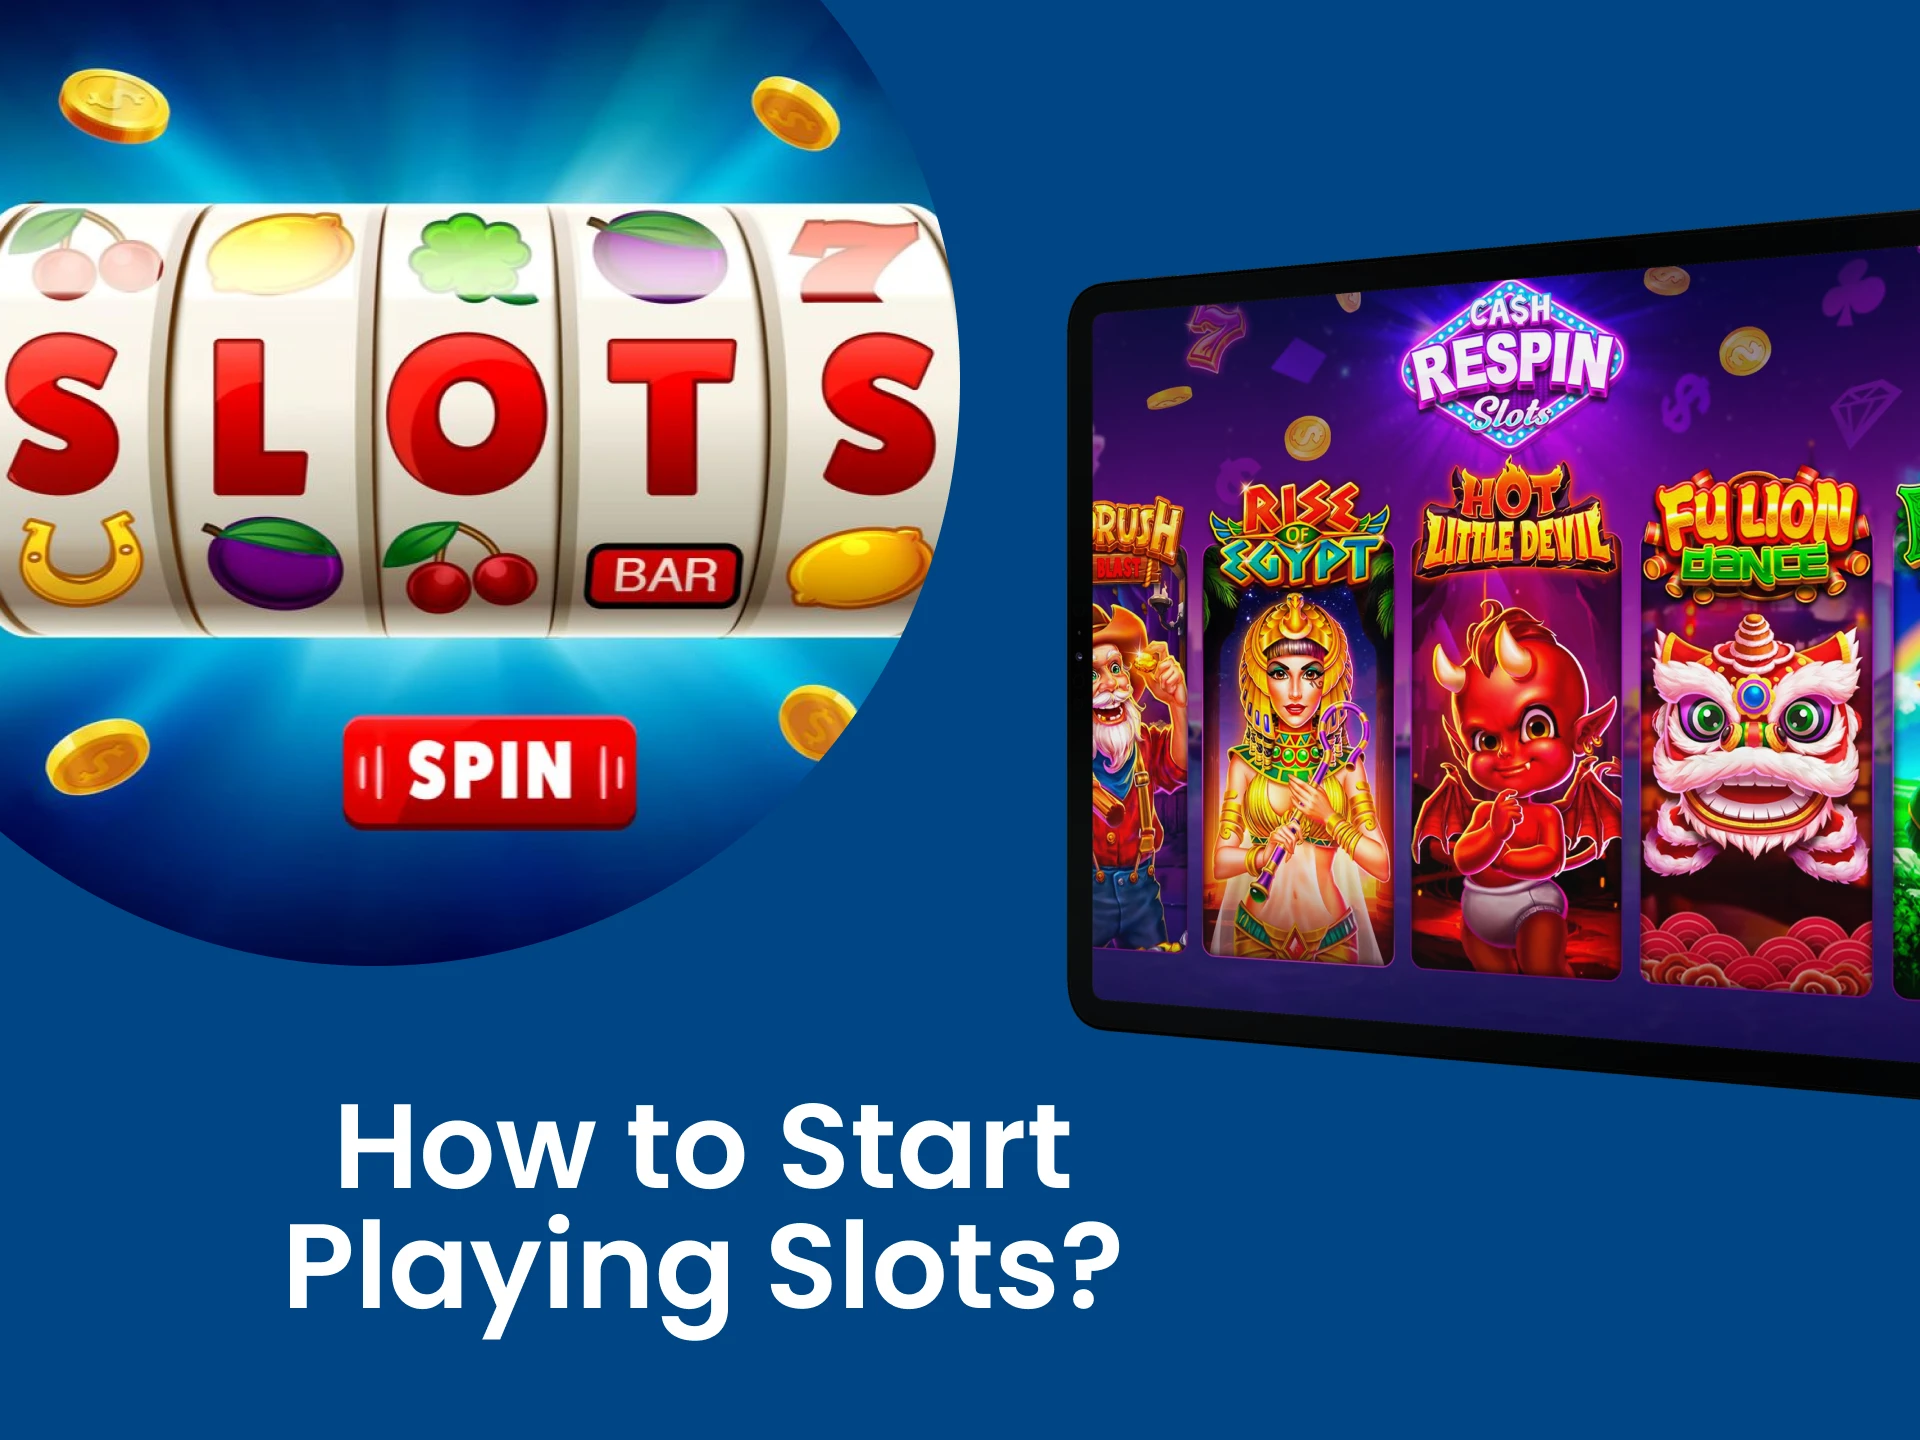 We will tell you how to start playing slots on your iPad.